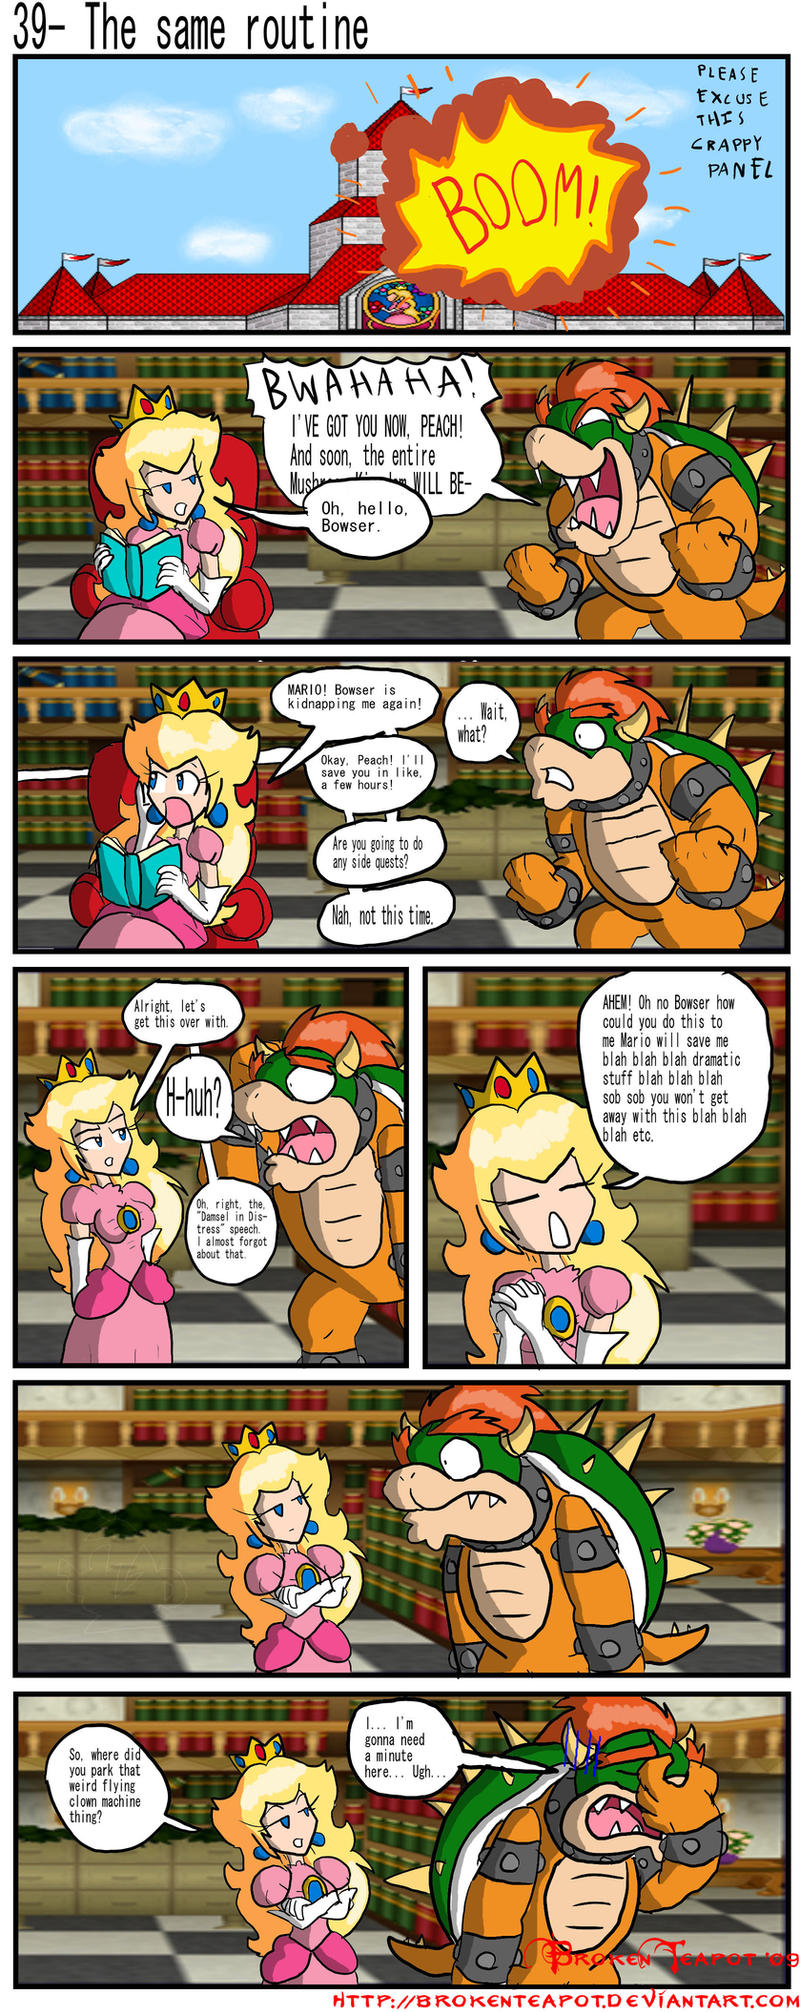 What if Princess Peach betrays Bowser?